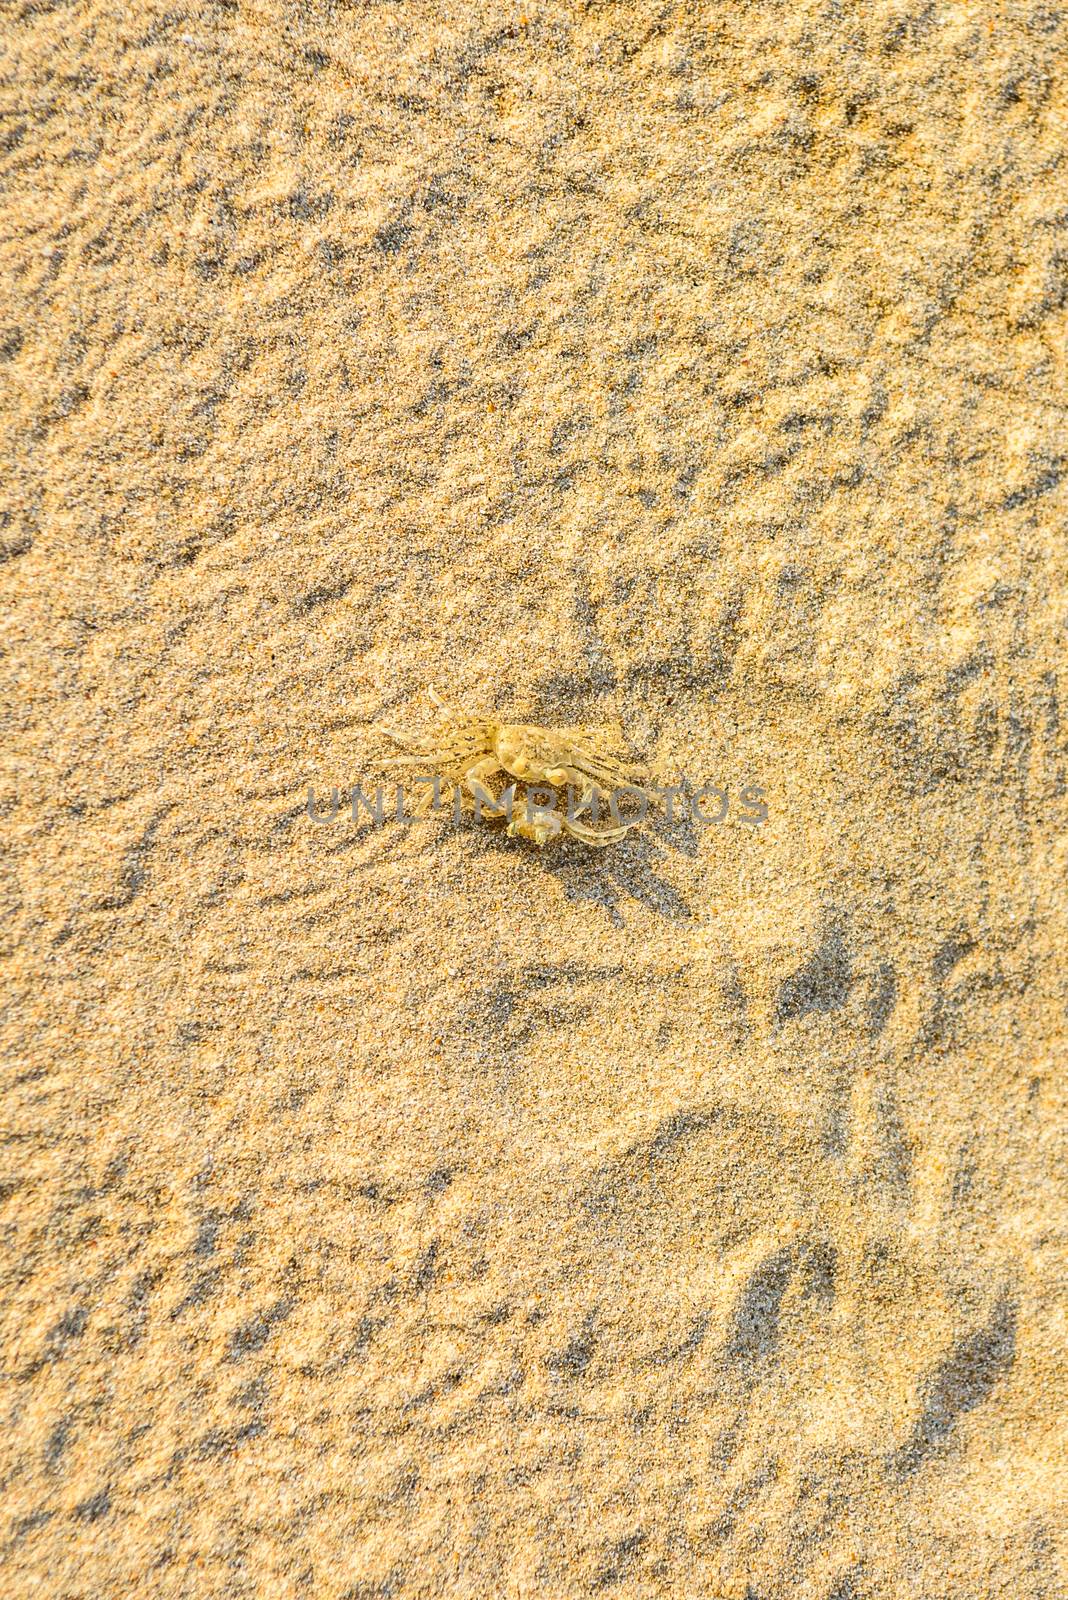 Tiny ghost crab, sand crab, Ocypodinae, Ocypode, White Sand Beac by Eagle2308